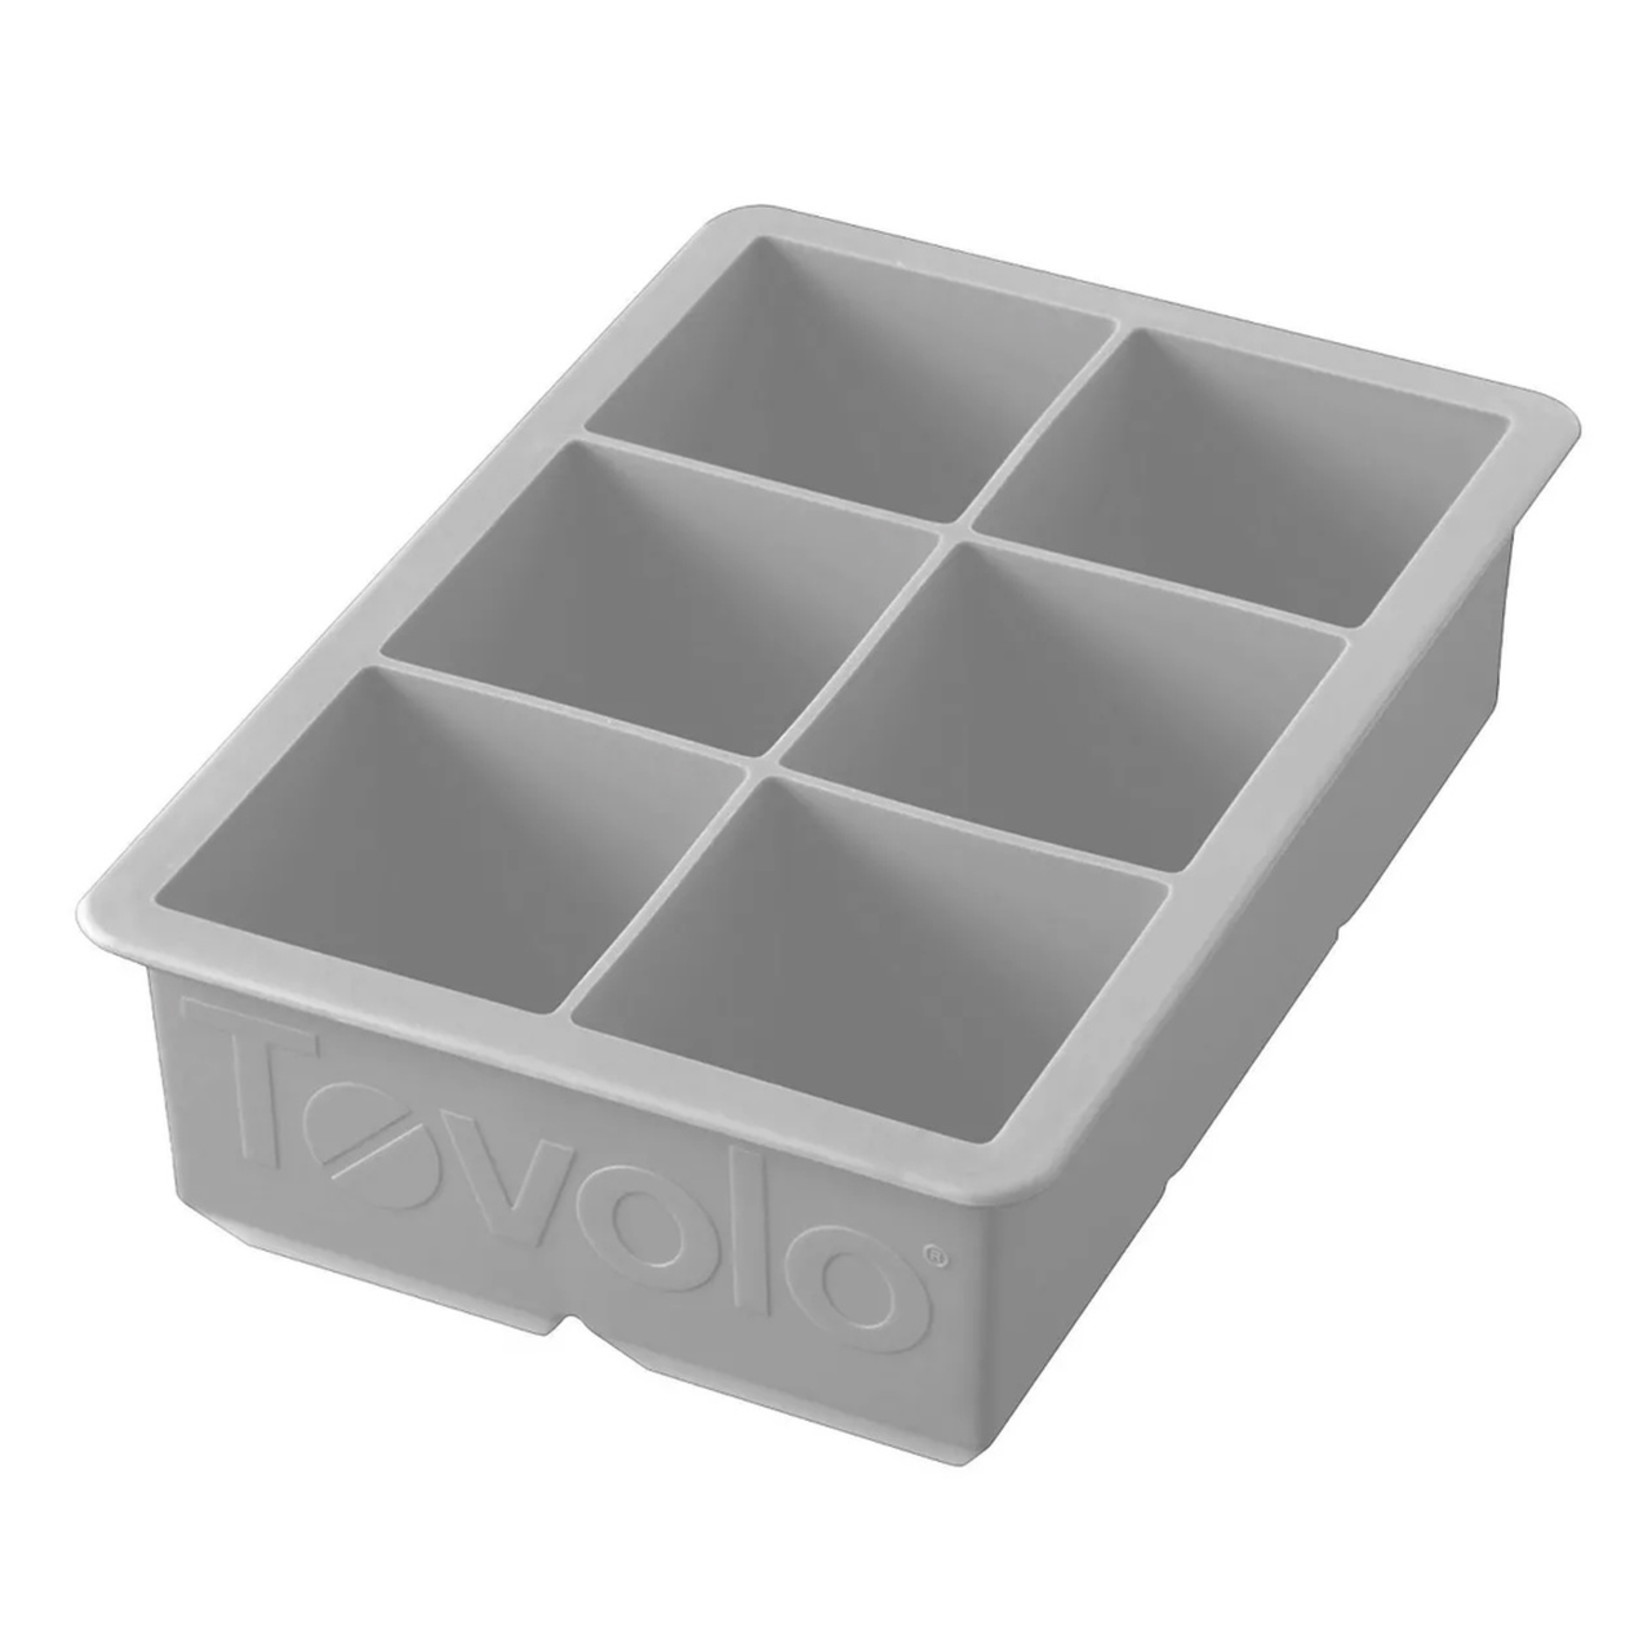 Tovolo King Cube Ice Tray Oyster Grey